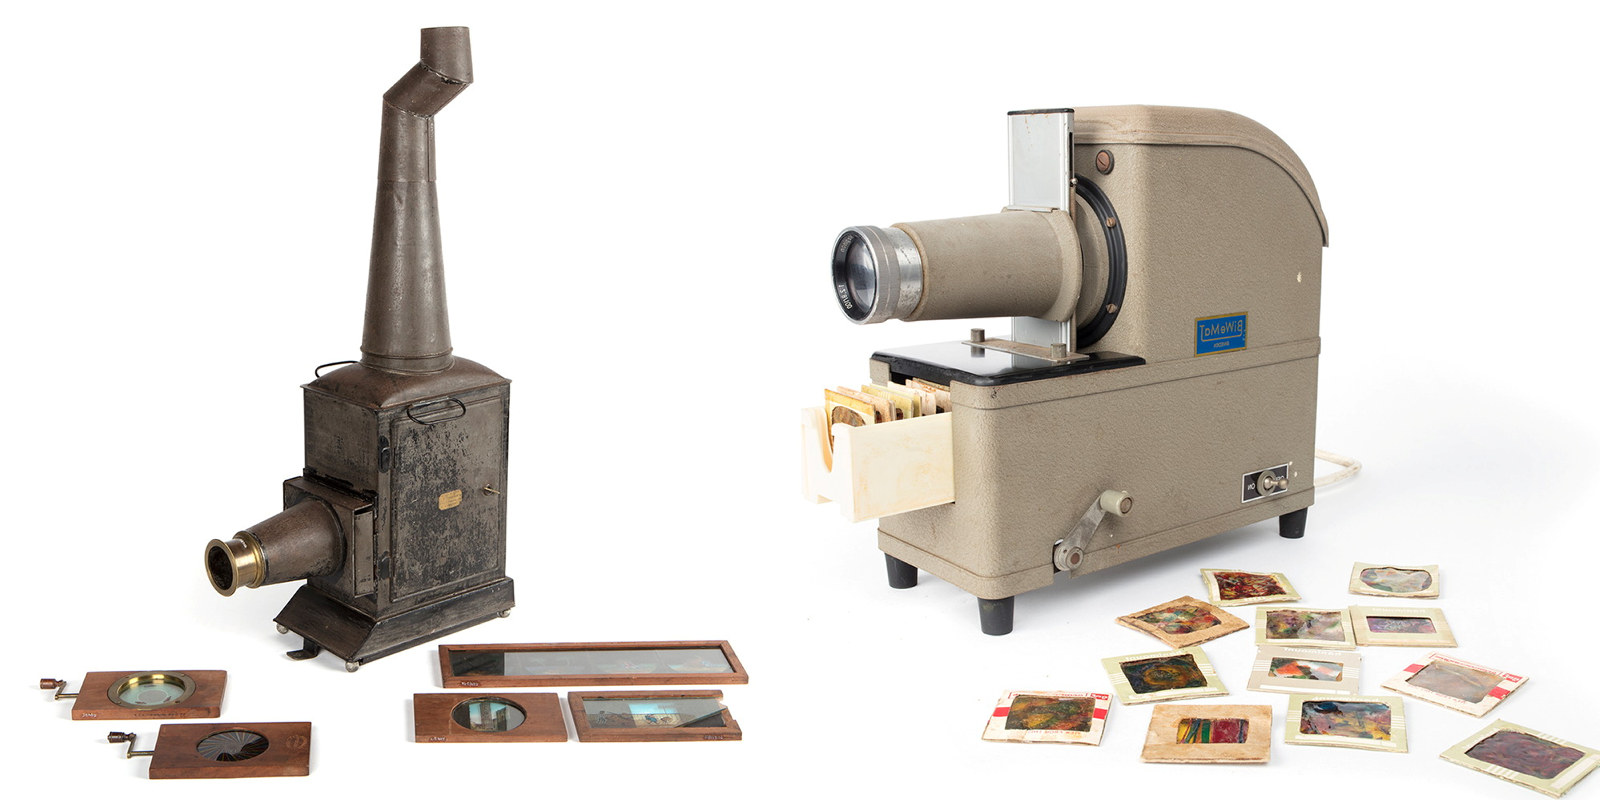 Metal lantern slide projector next to electric projector, both with related slides.